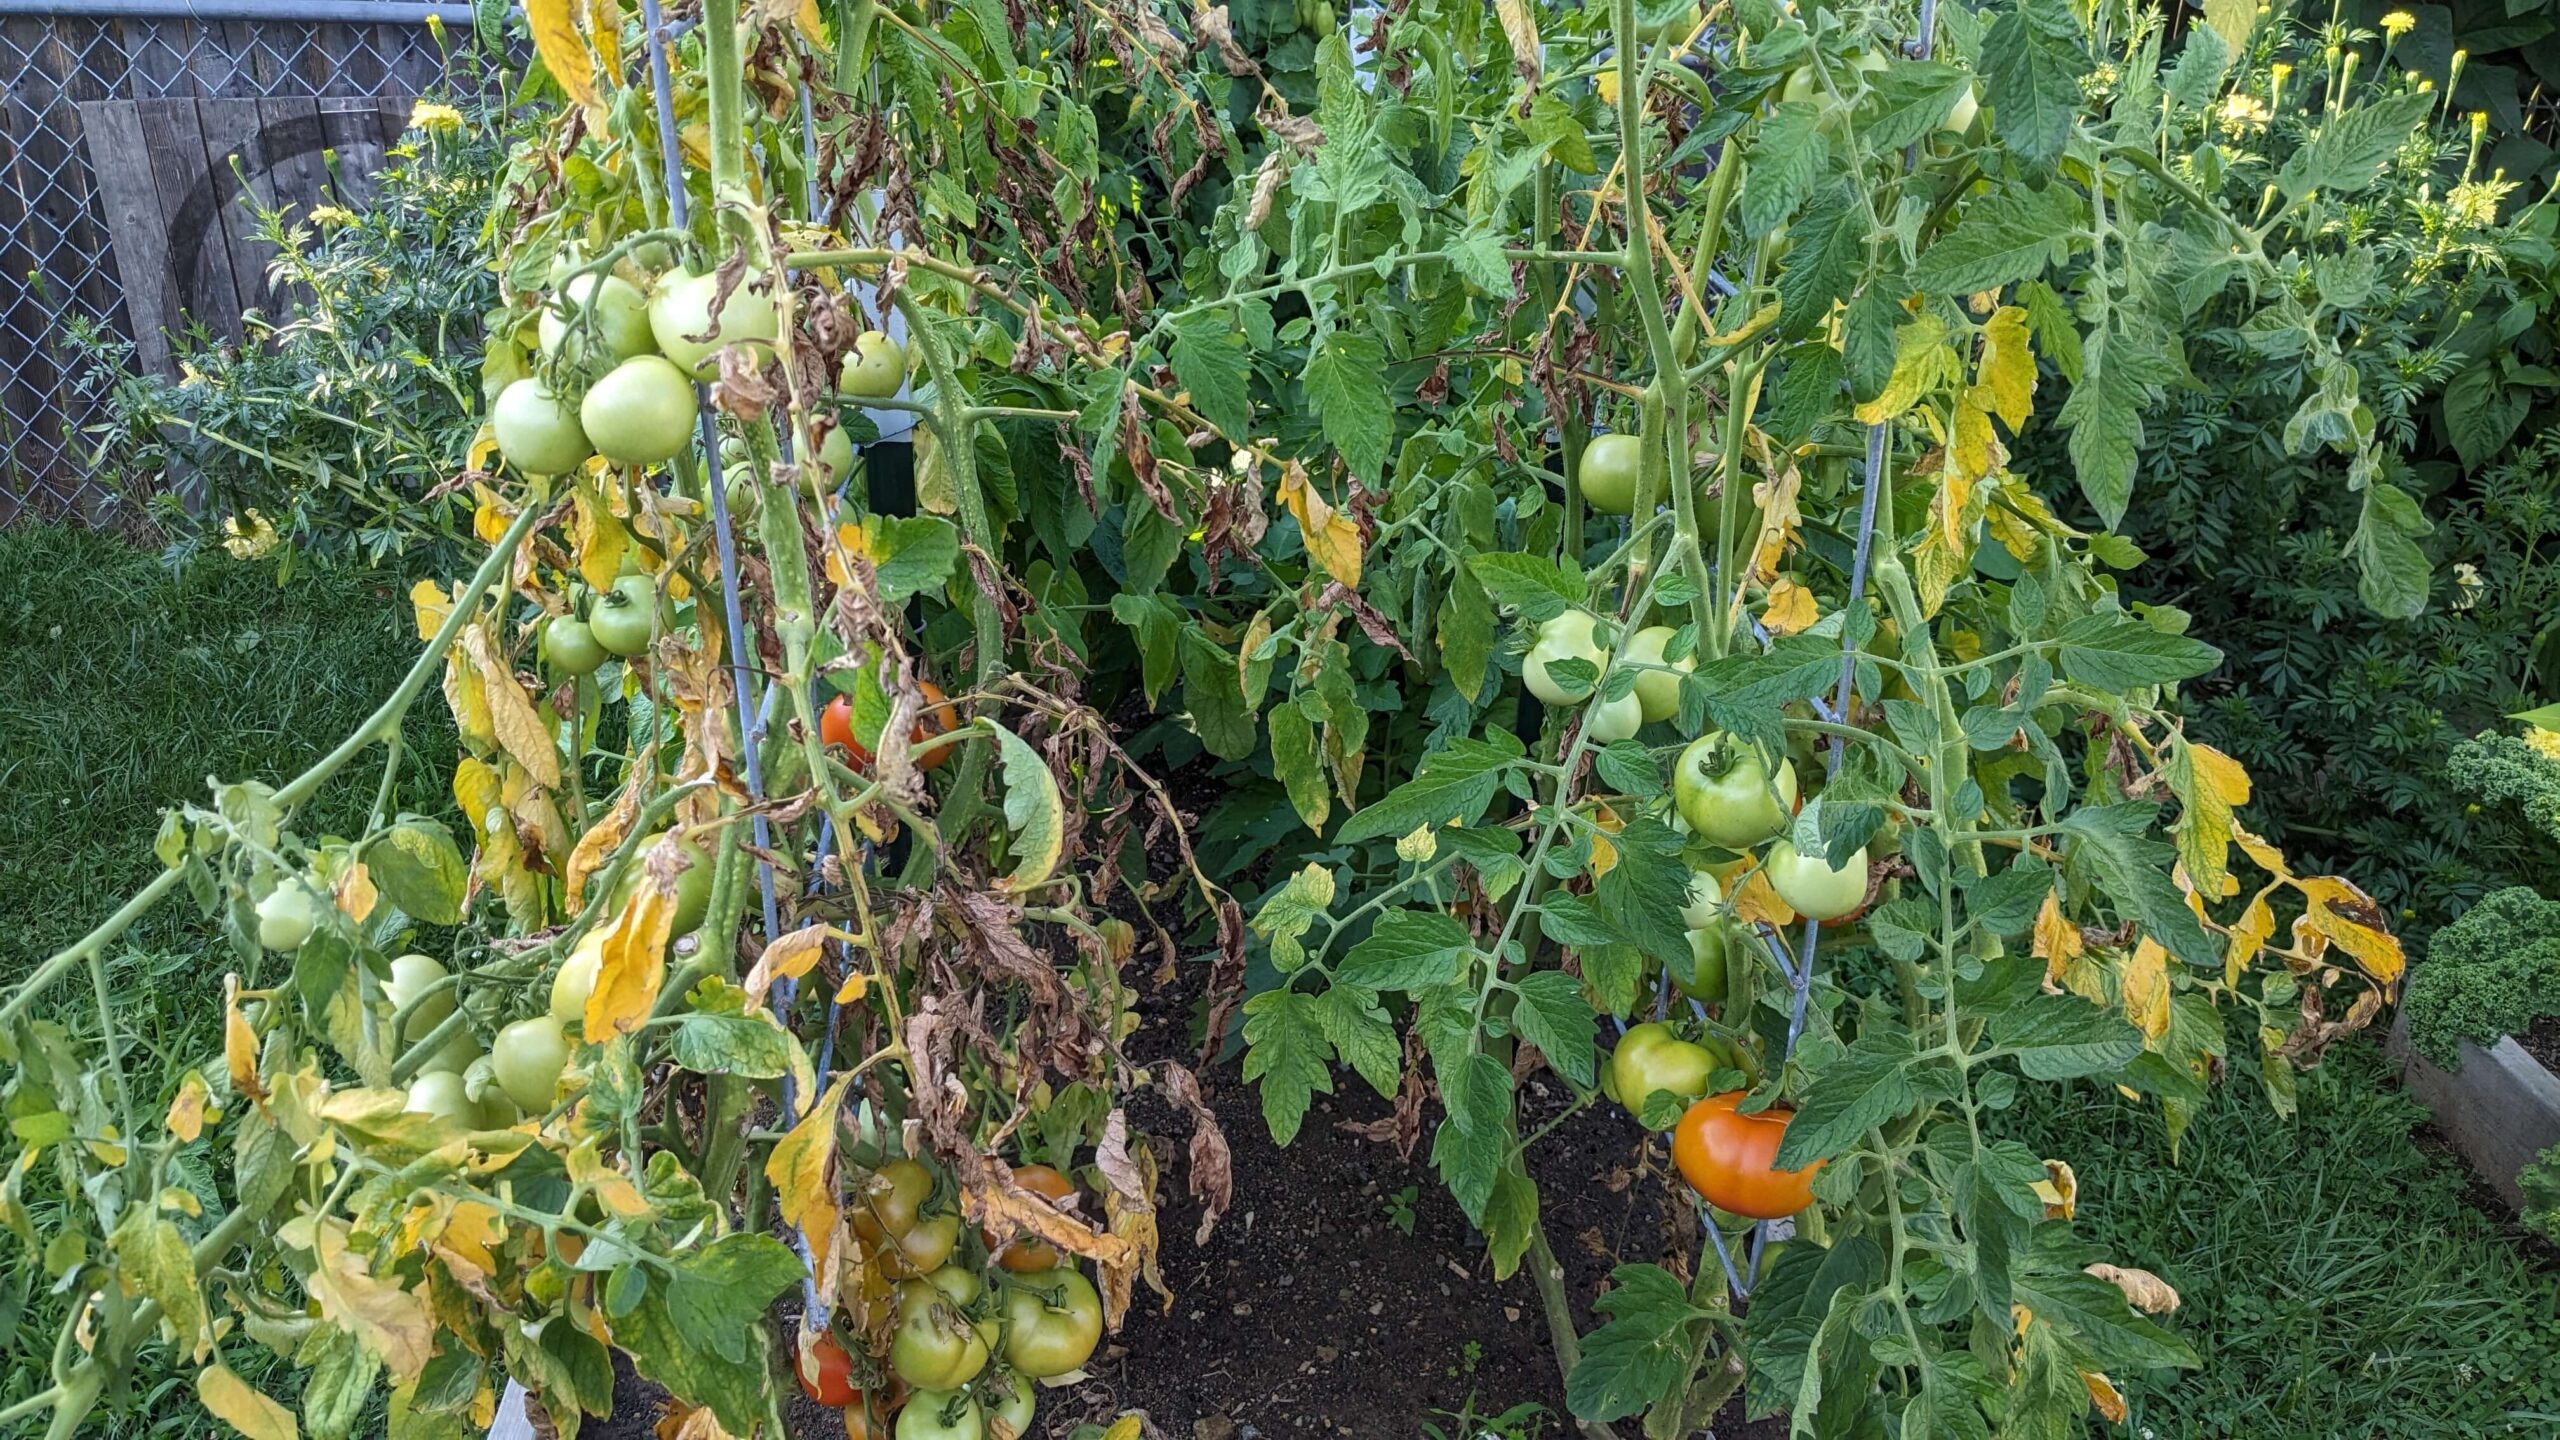 two rows of tomato plants growing on cattle panels